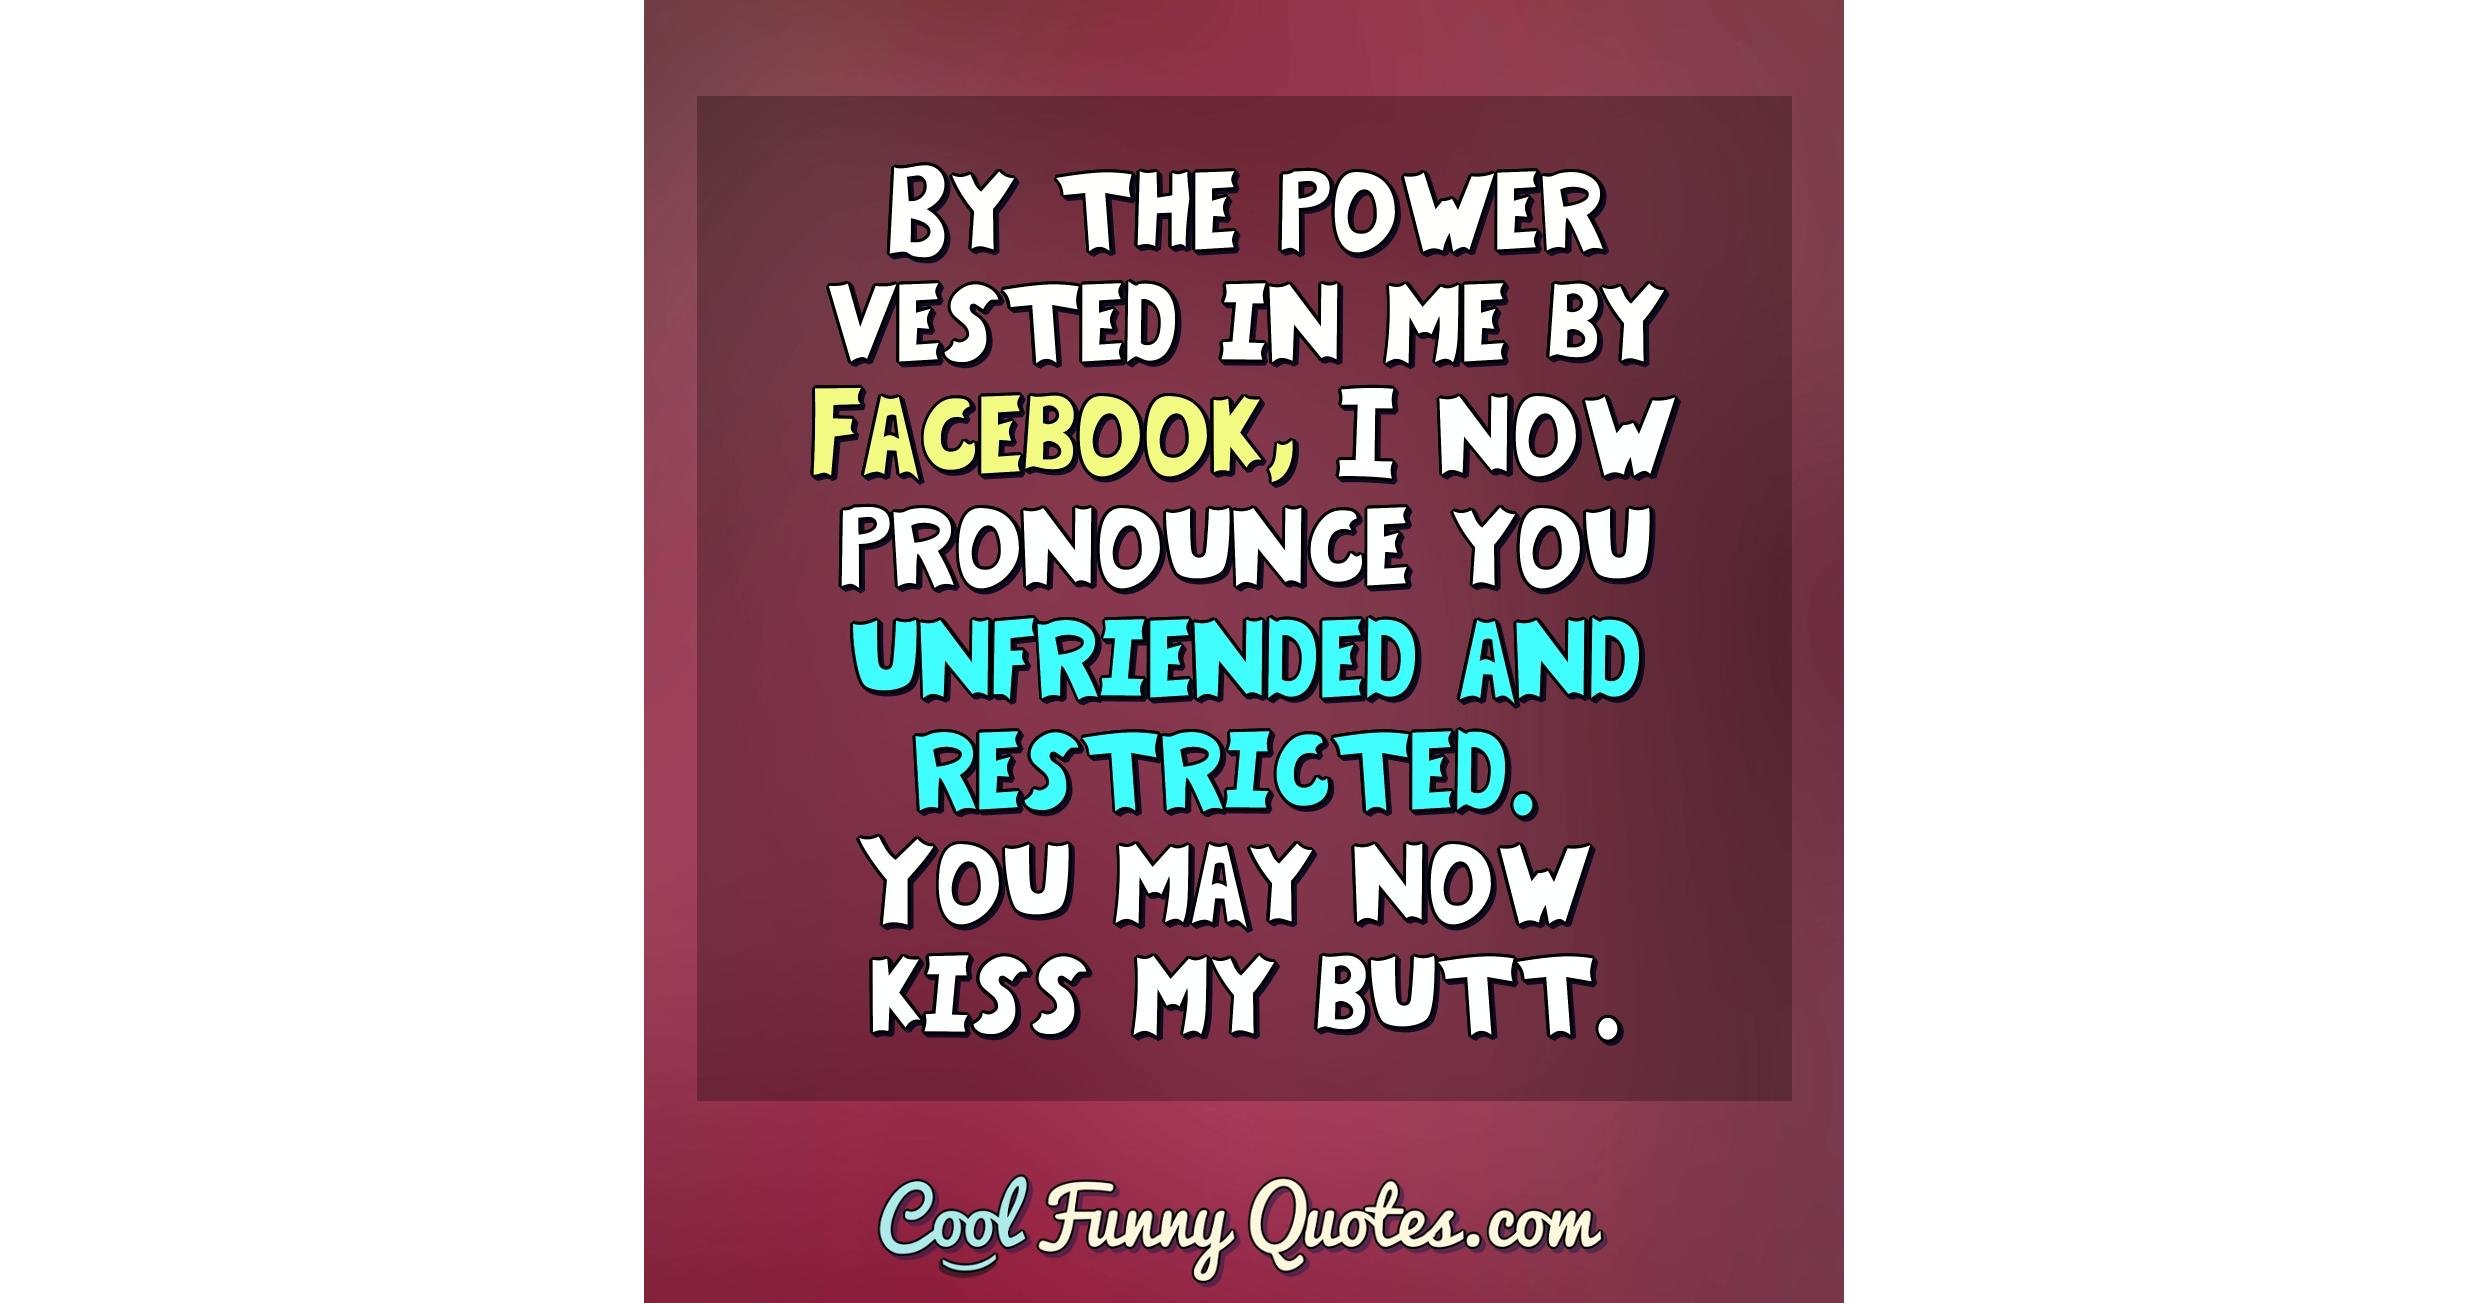 lige konjugat volleyball By the power vested in me by Facebook, I now pronounce you unfriended and...